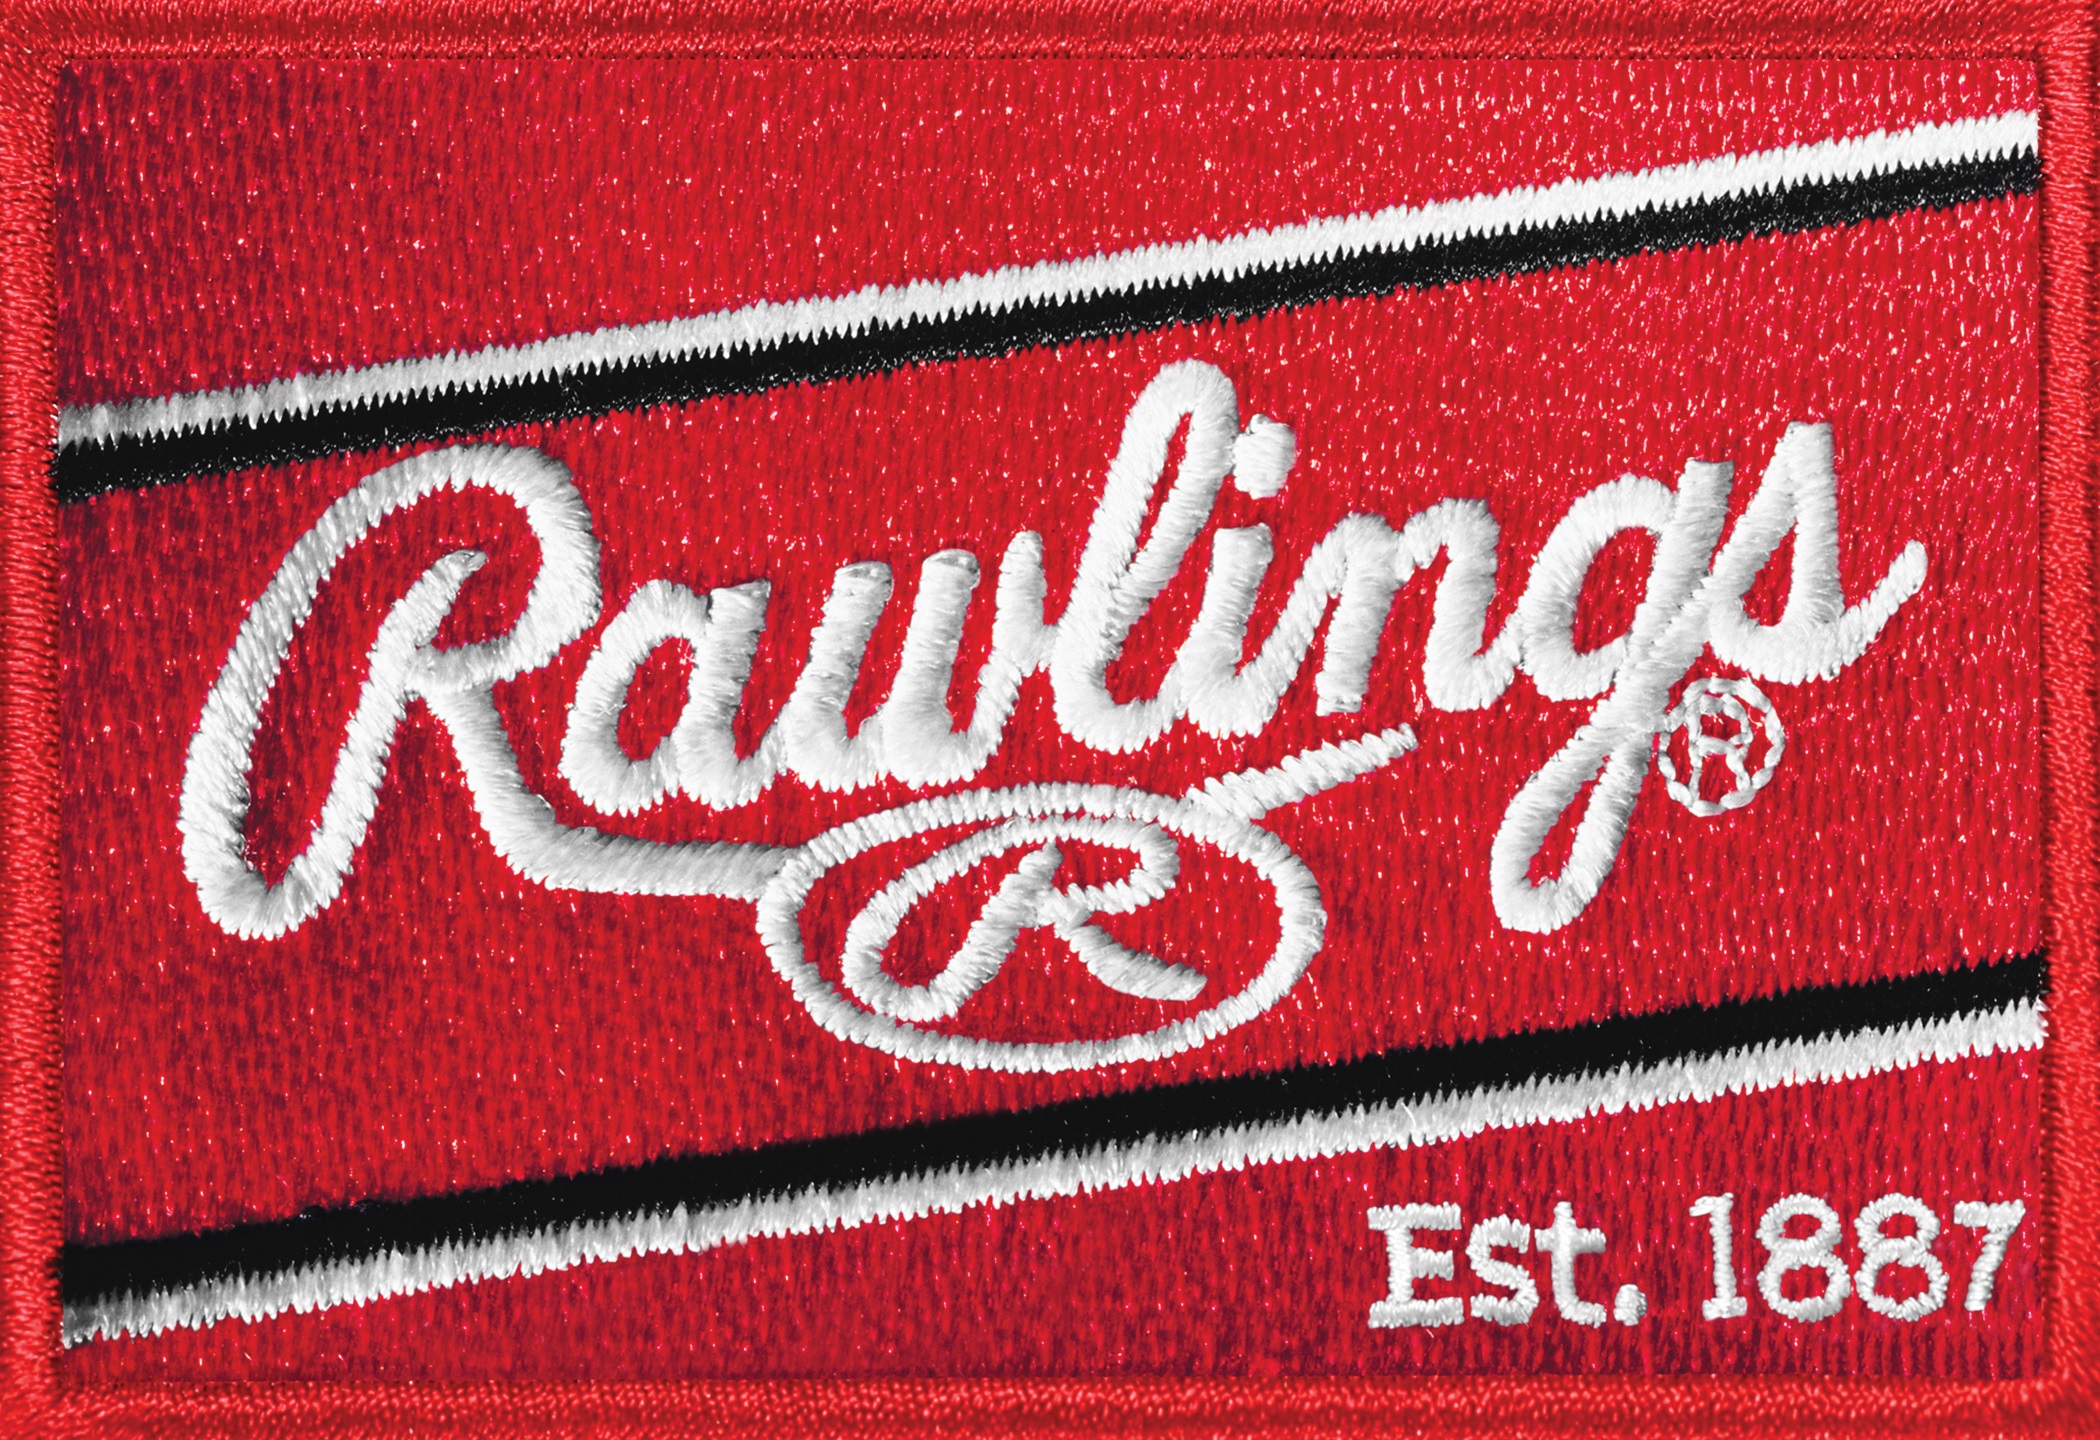 Graphic: Rawling's logo in patch form